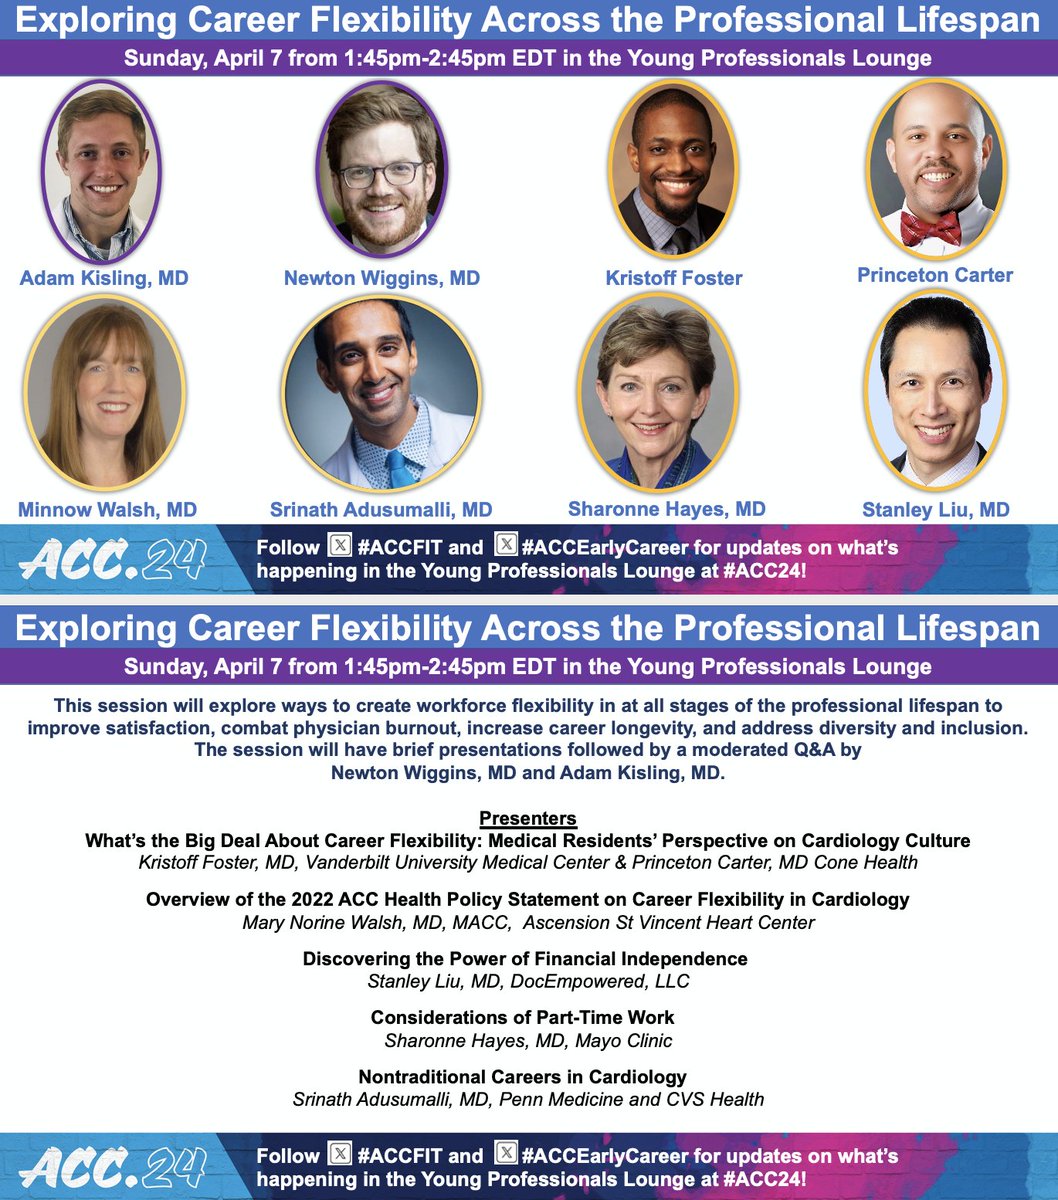 Ok, I’m done. So excited to discuss career flexibility and financial independence at #ACC24 with @MinnowWalsh, @sri_adu, @SharonneHayes, Kristoff Foster, & Princeton Carter w/ @Adam_Kisling, @nbwiggins, @noshreza, and @T_GuptaMD. See you all in Atlanta!